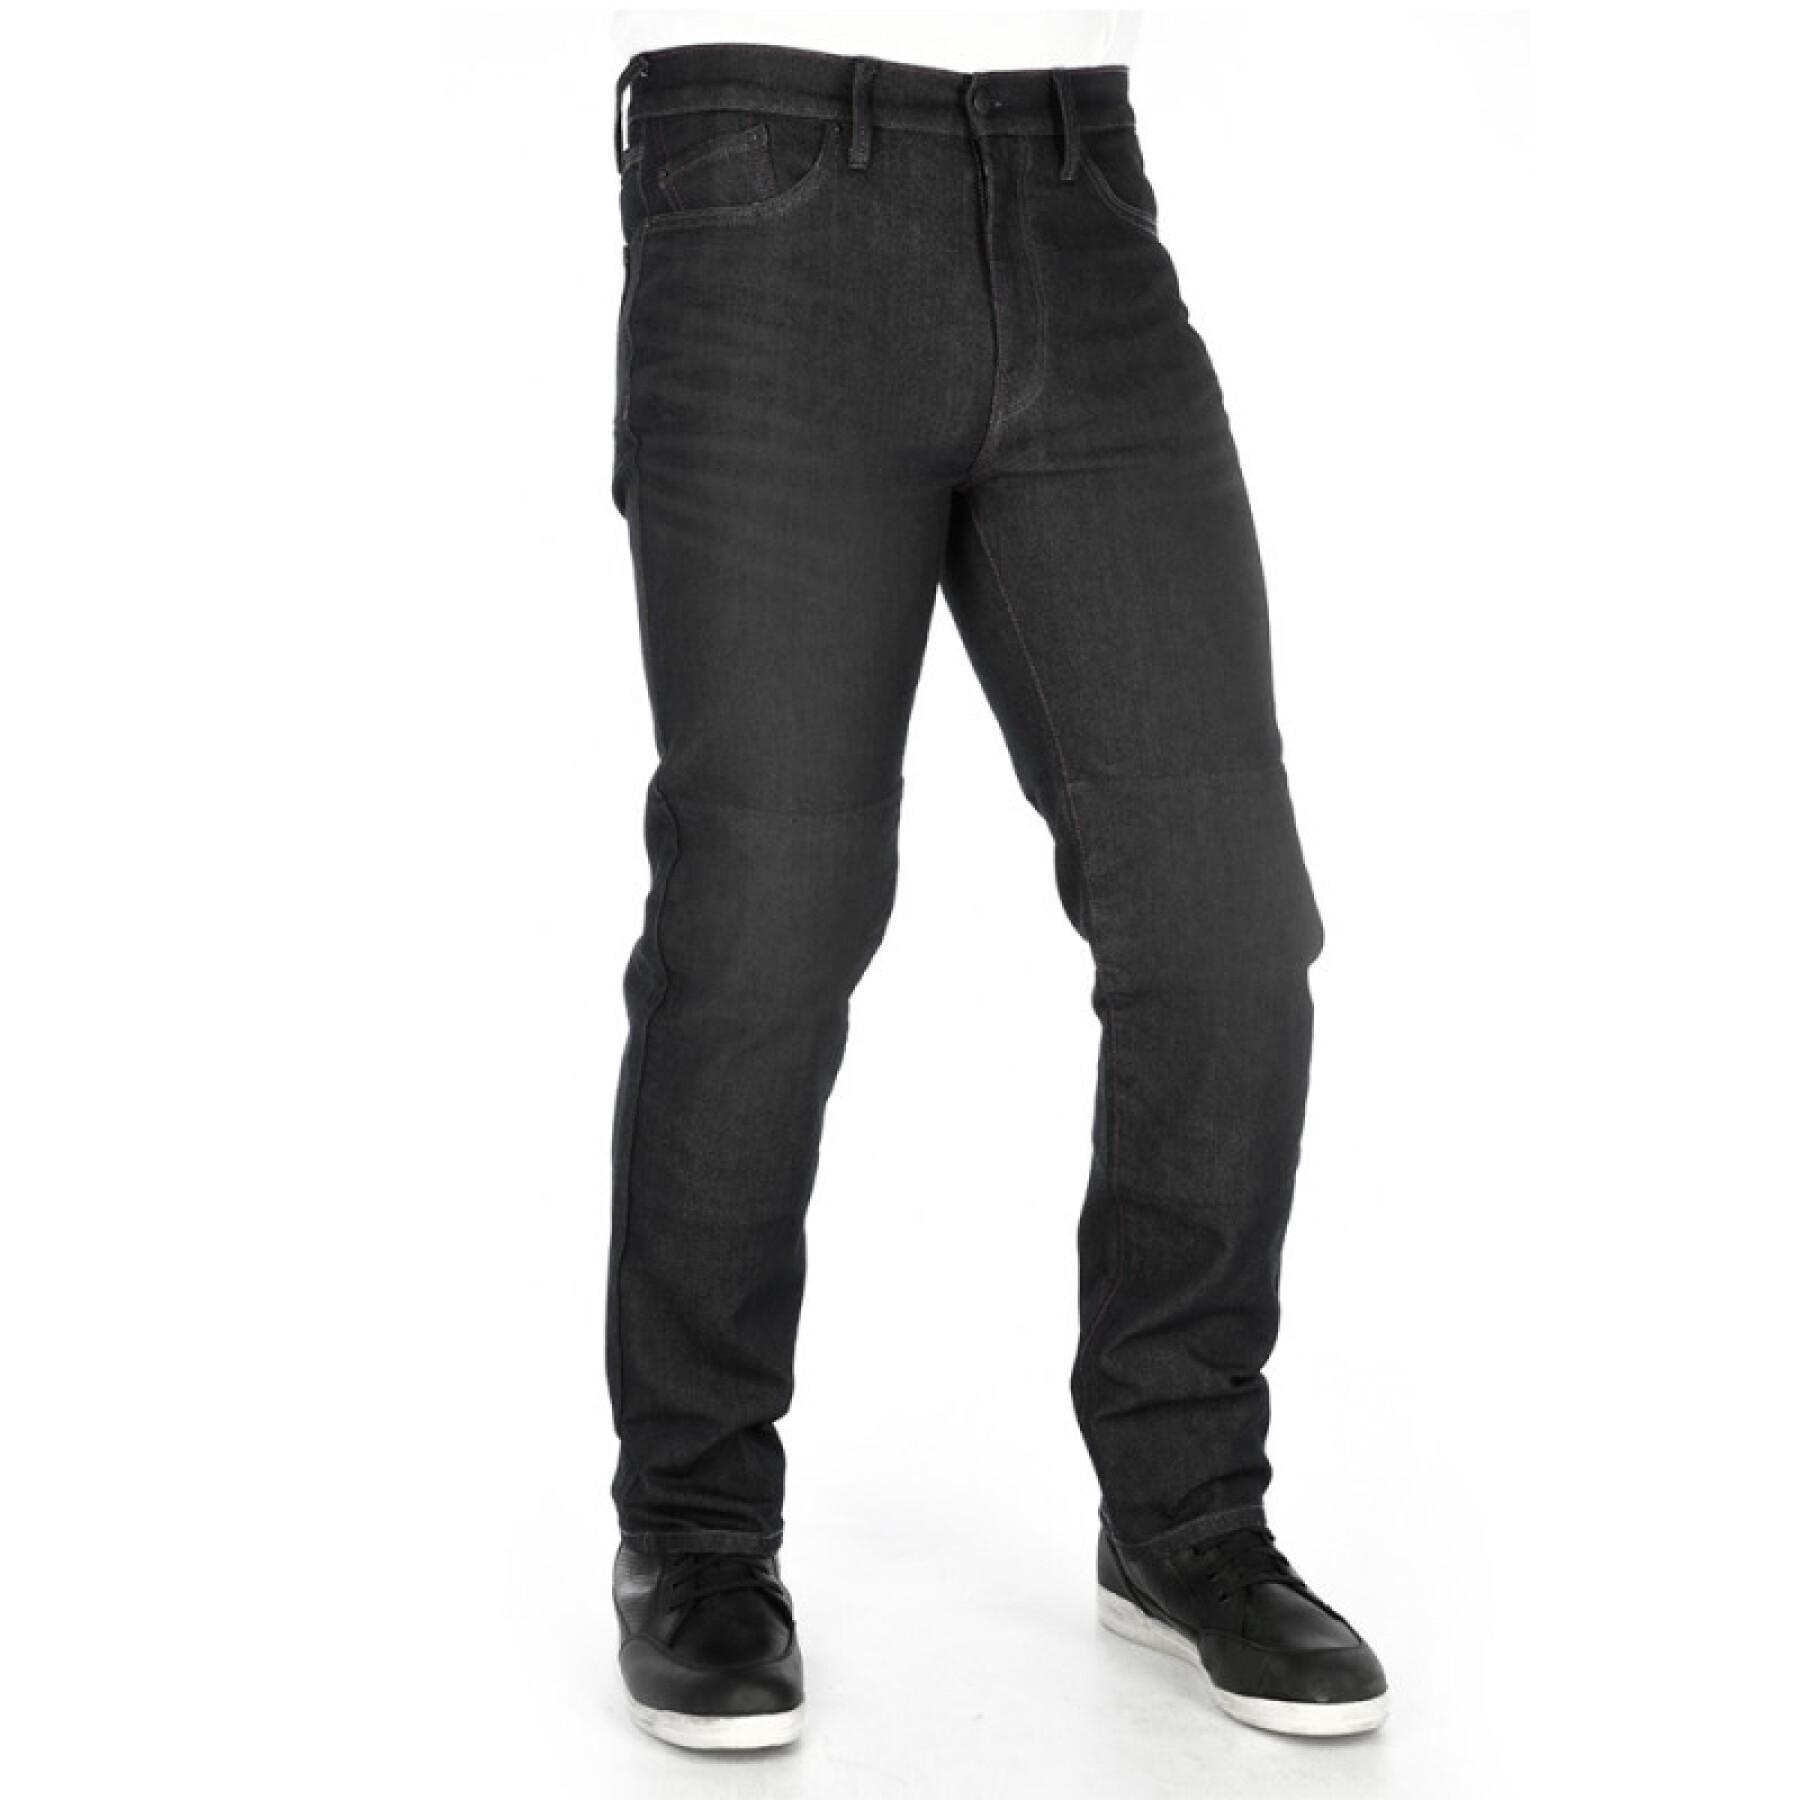 Jeans moto dritti Oxford Original Approved AA Dynamic R